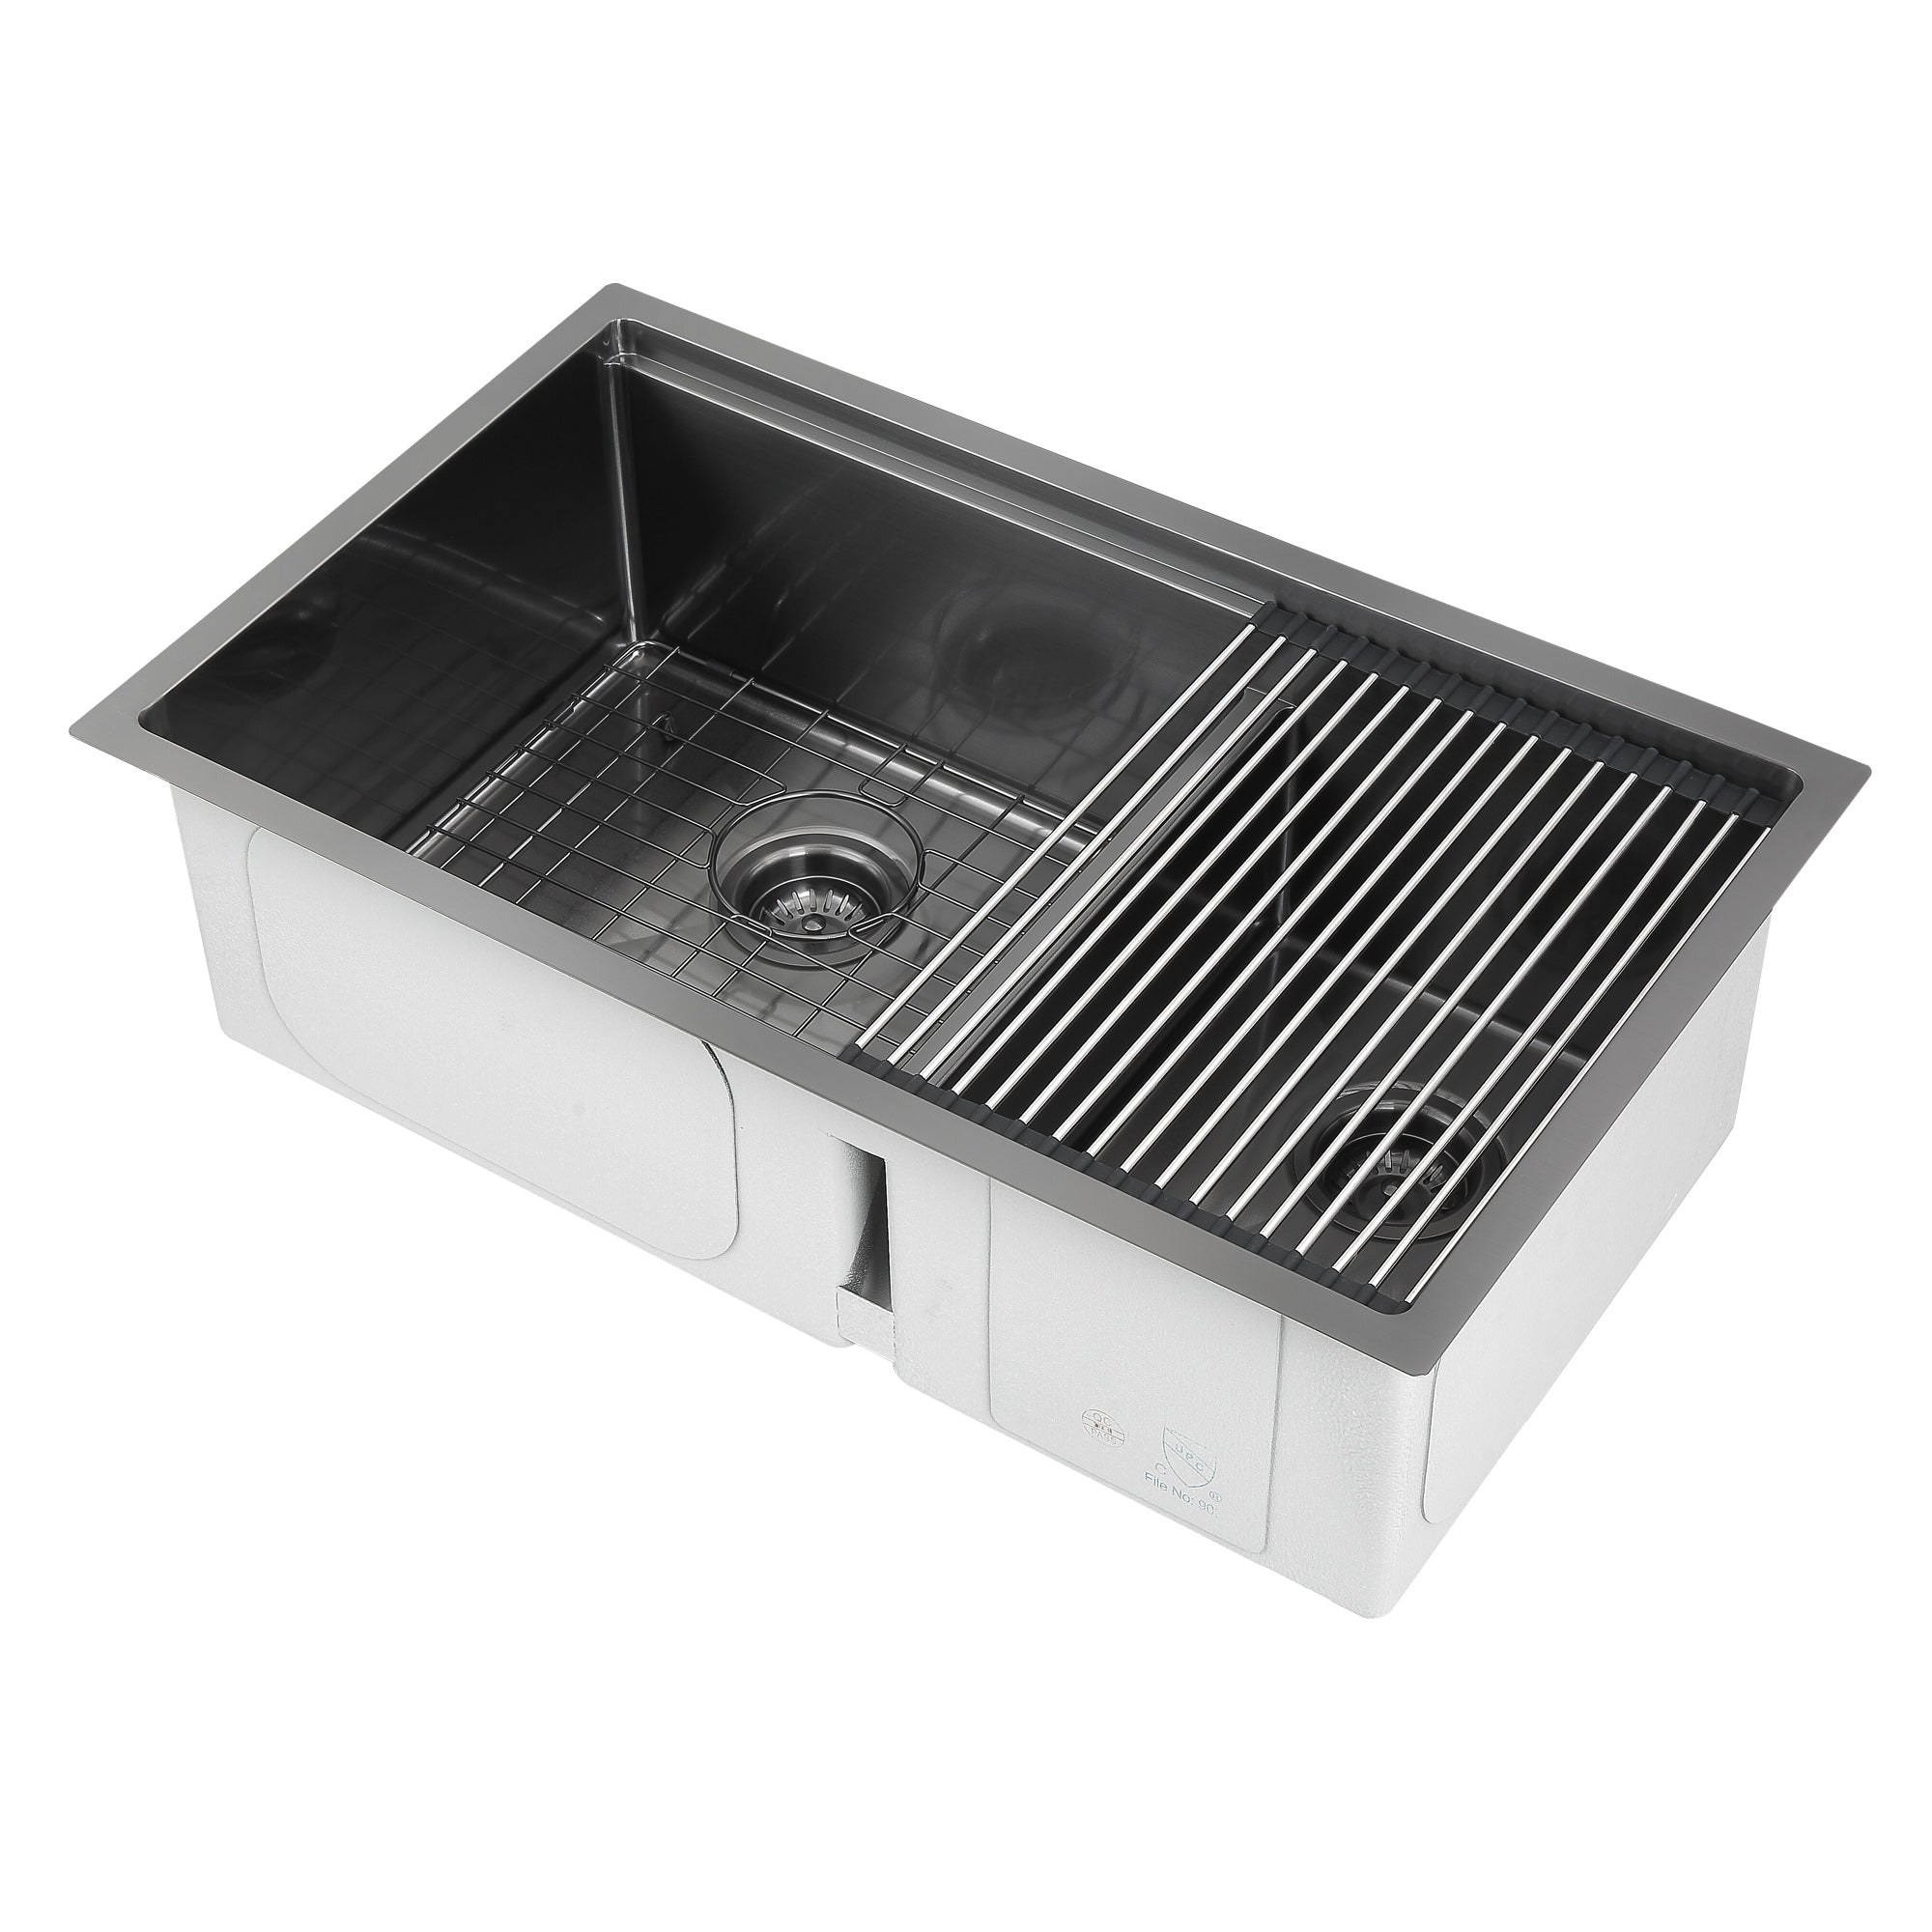 Ancona 32” 60/40 Double Bowl Undermount Kitchen Sink with Grid and Roll-Up Mat in Black PVD Nano